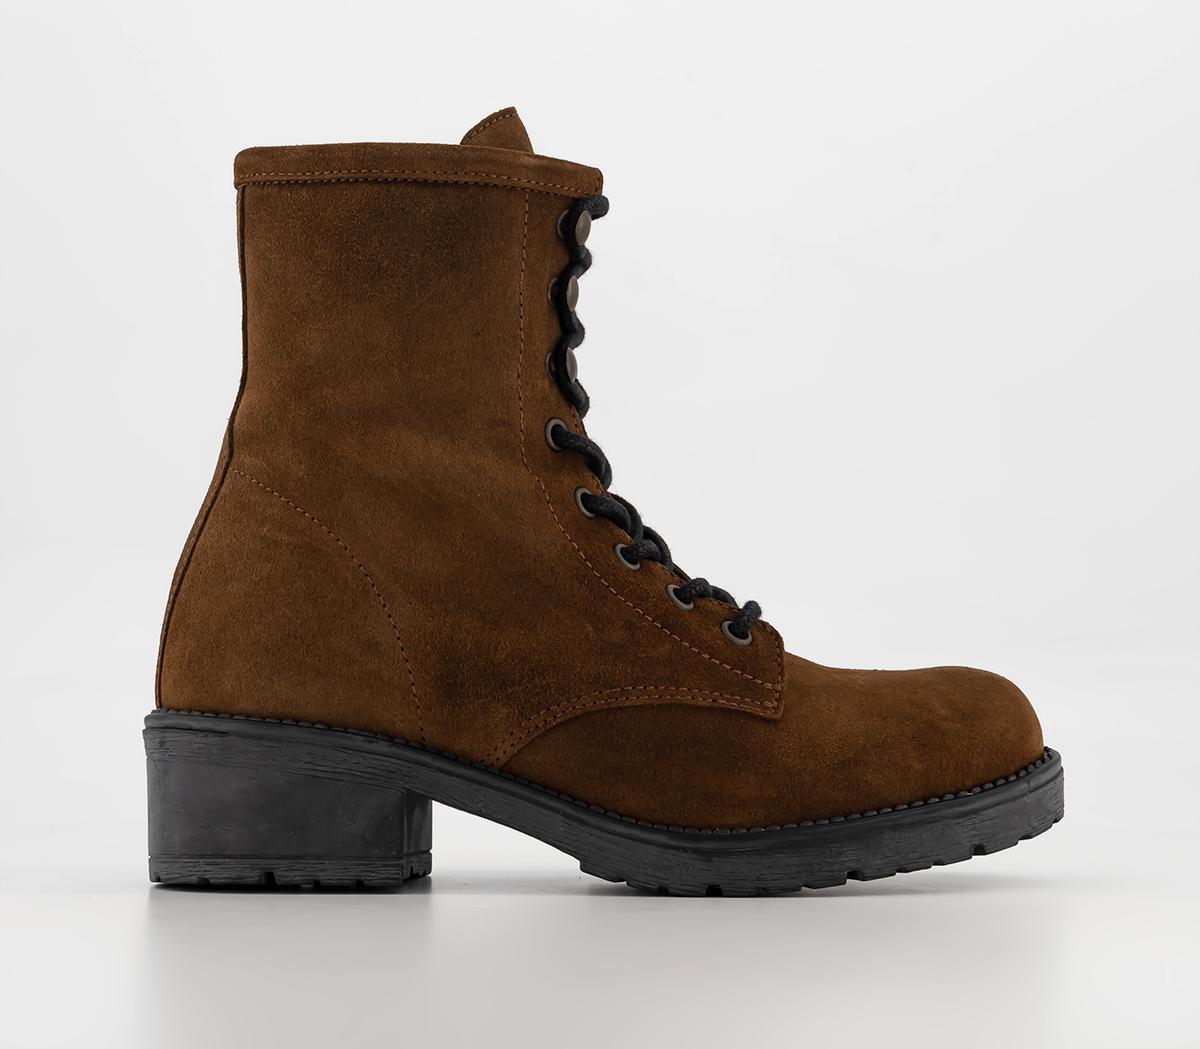 OFFICEArcher Suede Lace Up Hiker BootsTan Suede